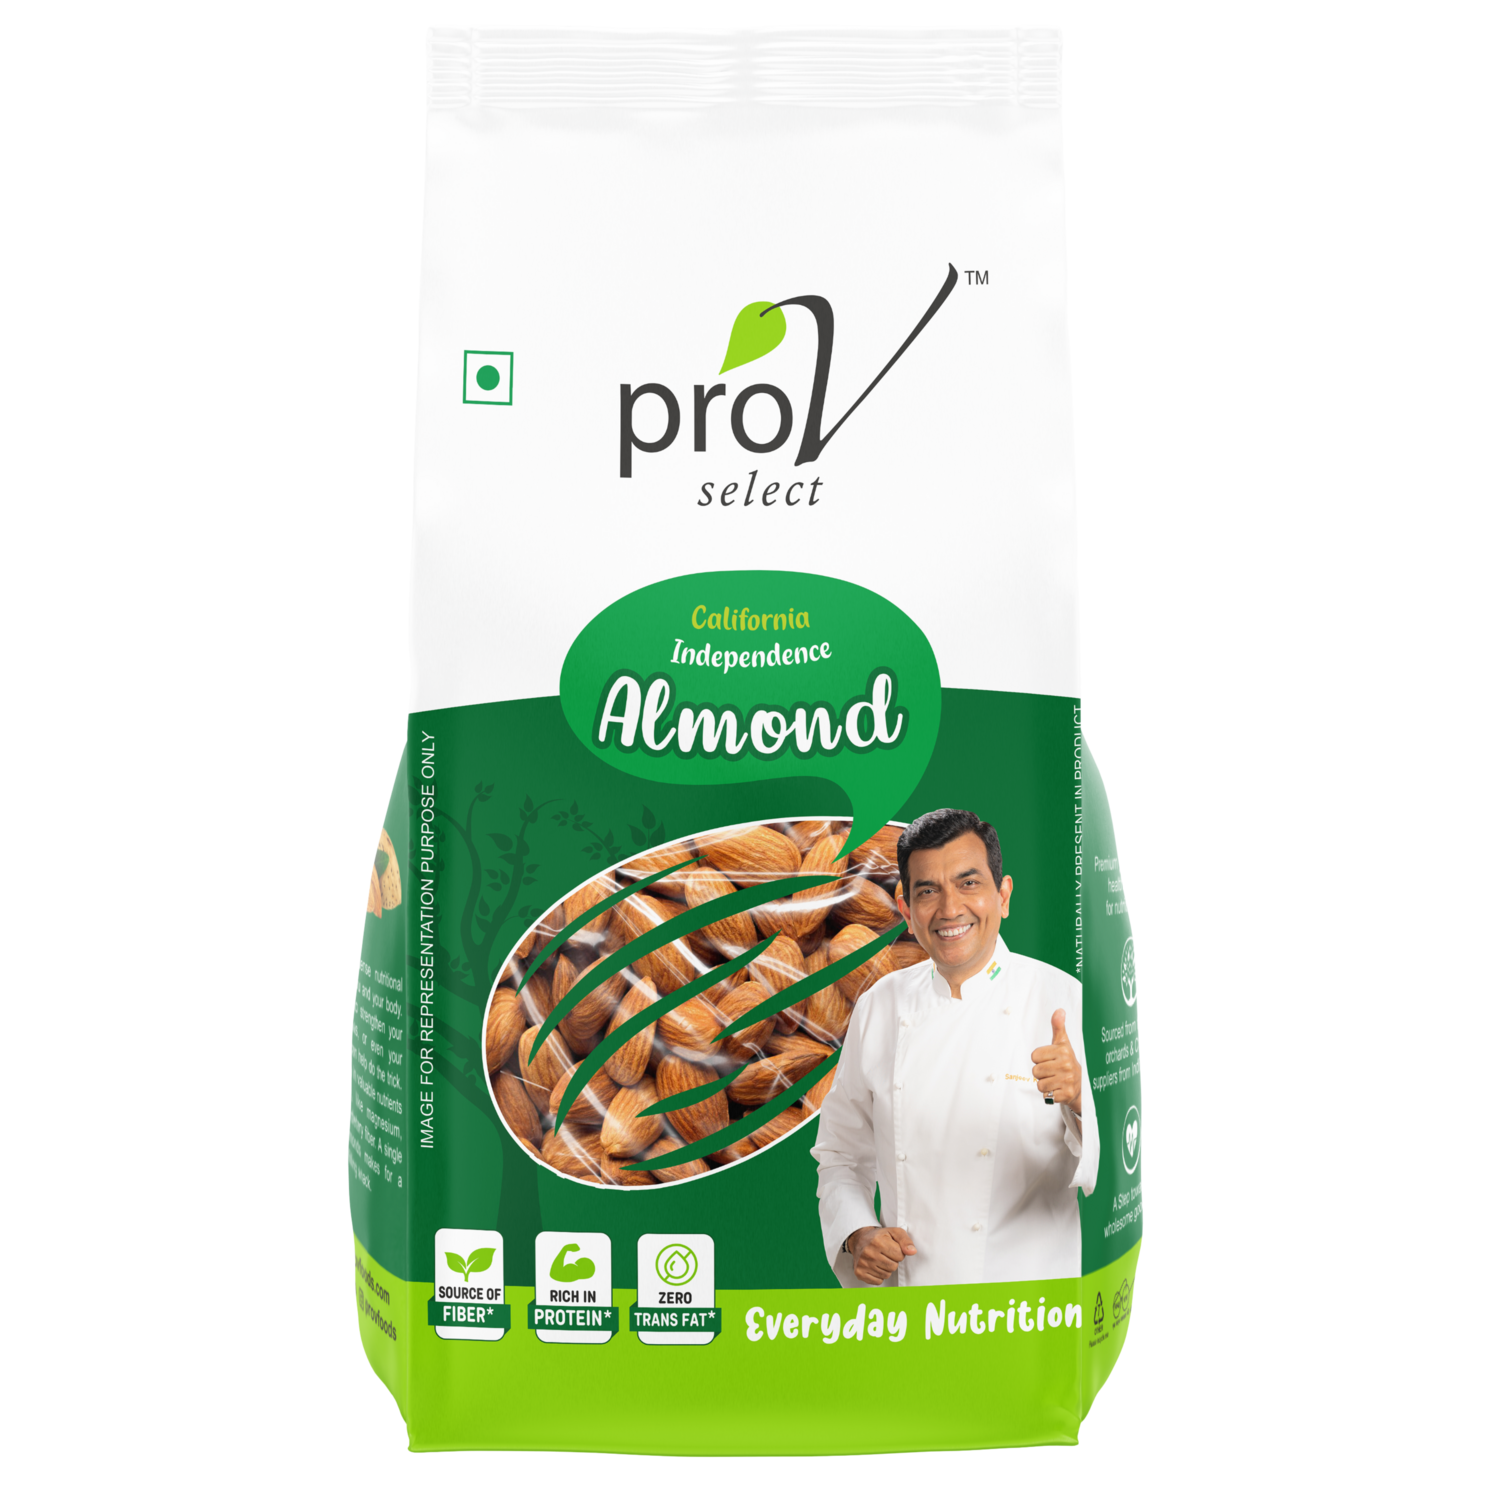 ProV Select Sanjeev Kapoor Edition - Almond Independence 500g